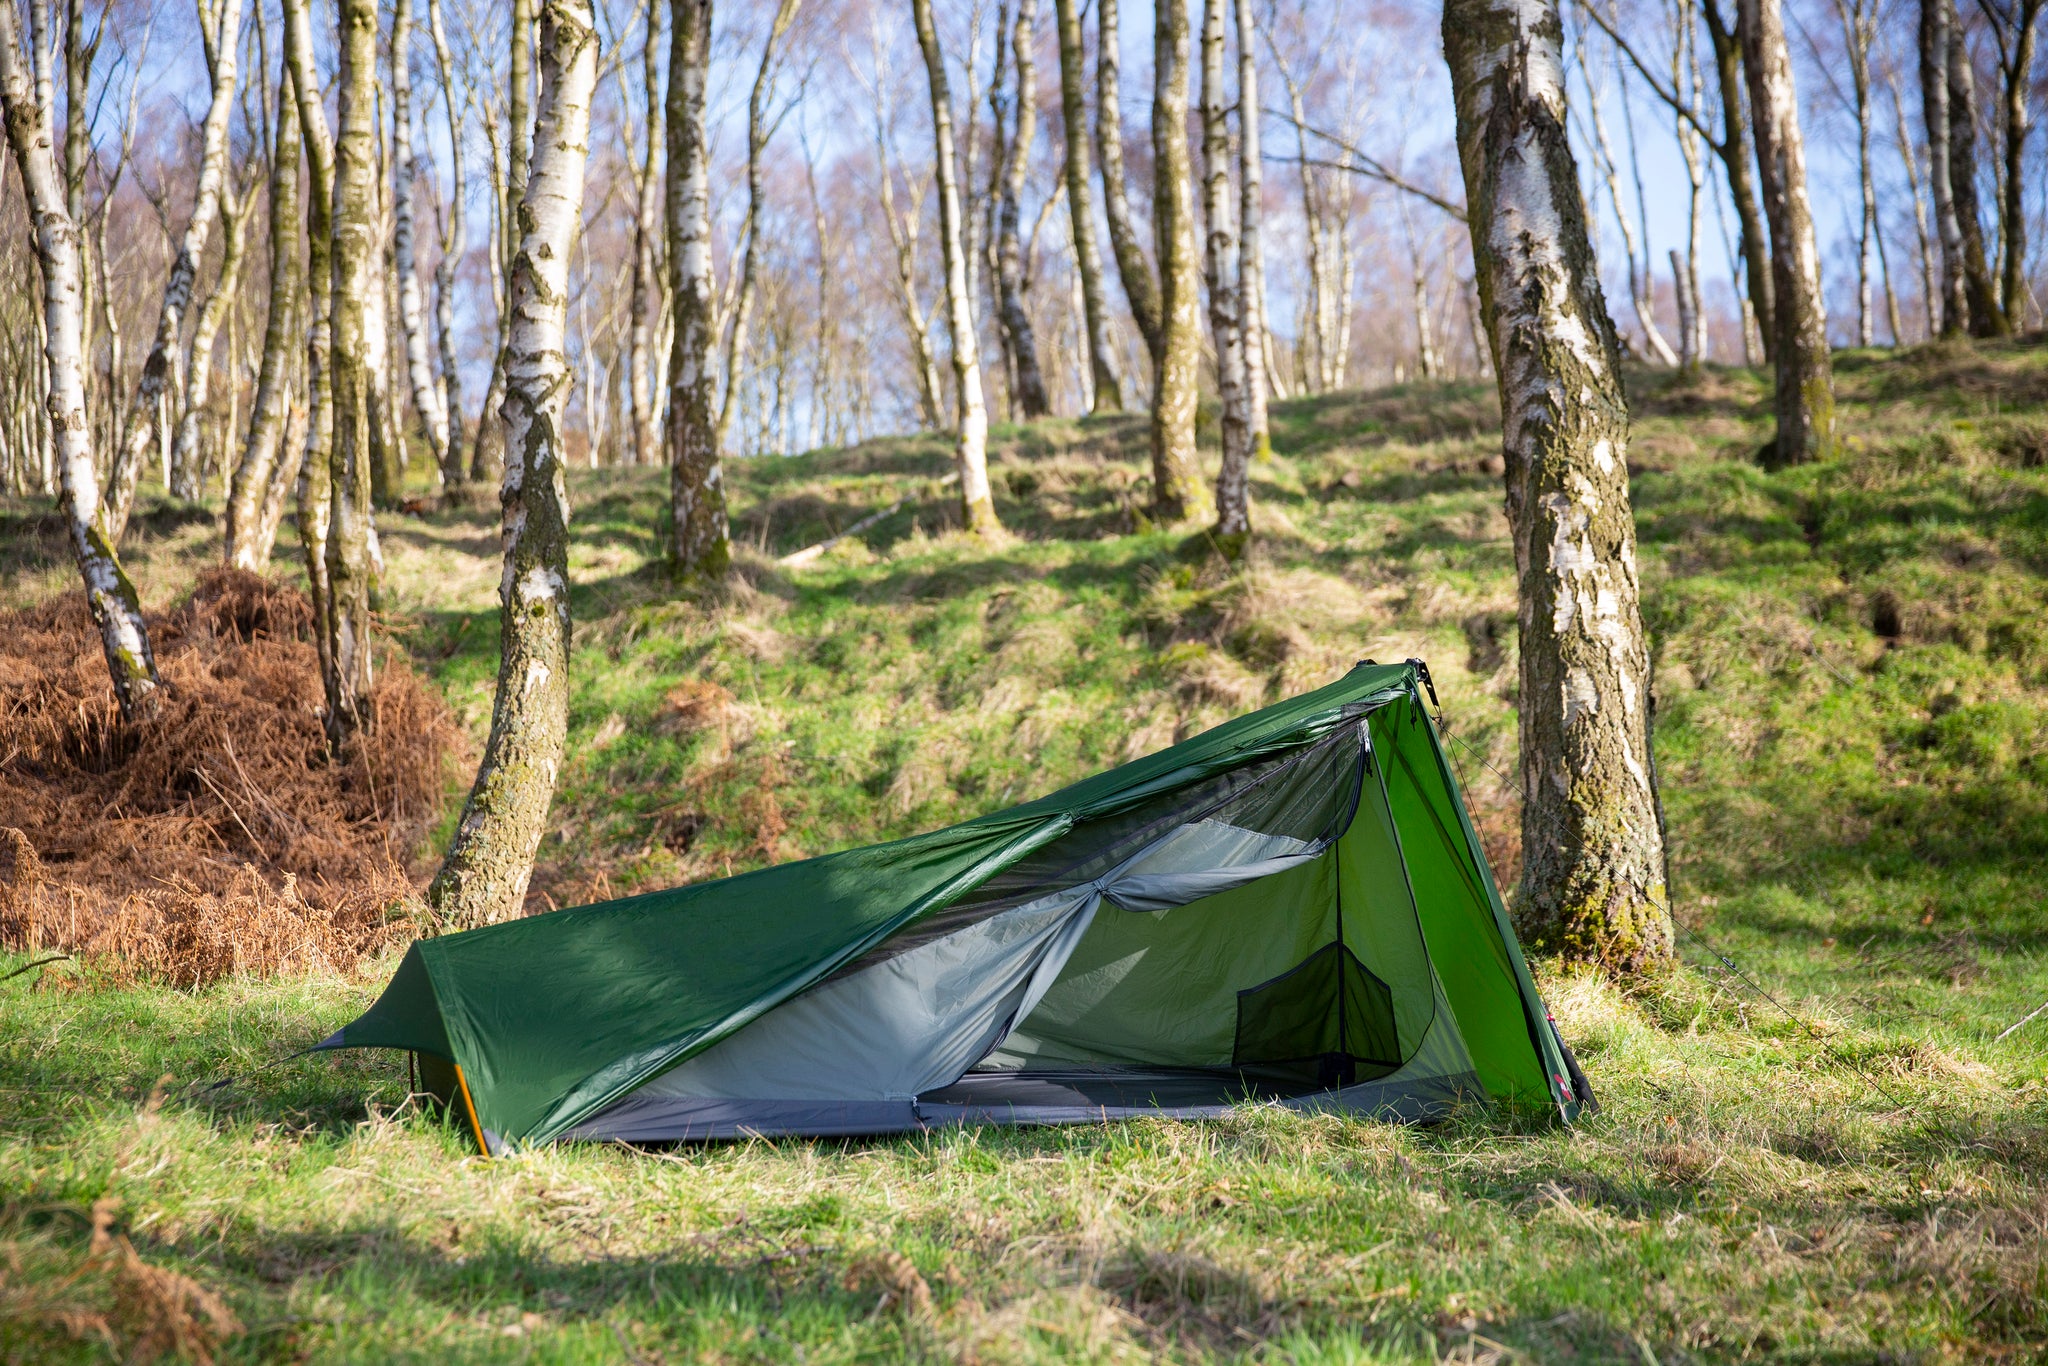 Lightweight bivvy tent with long lateral door for easy access